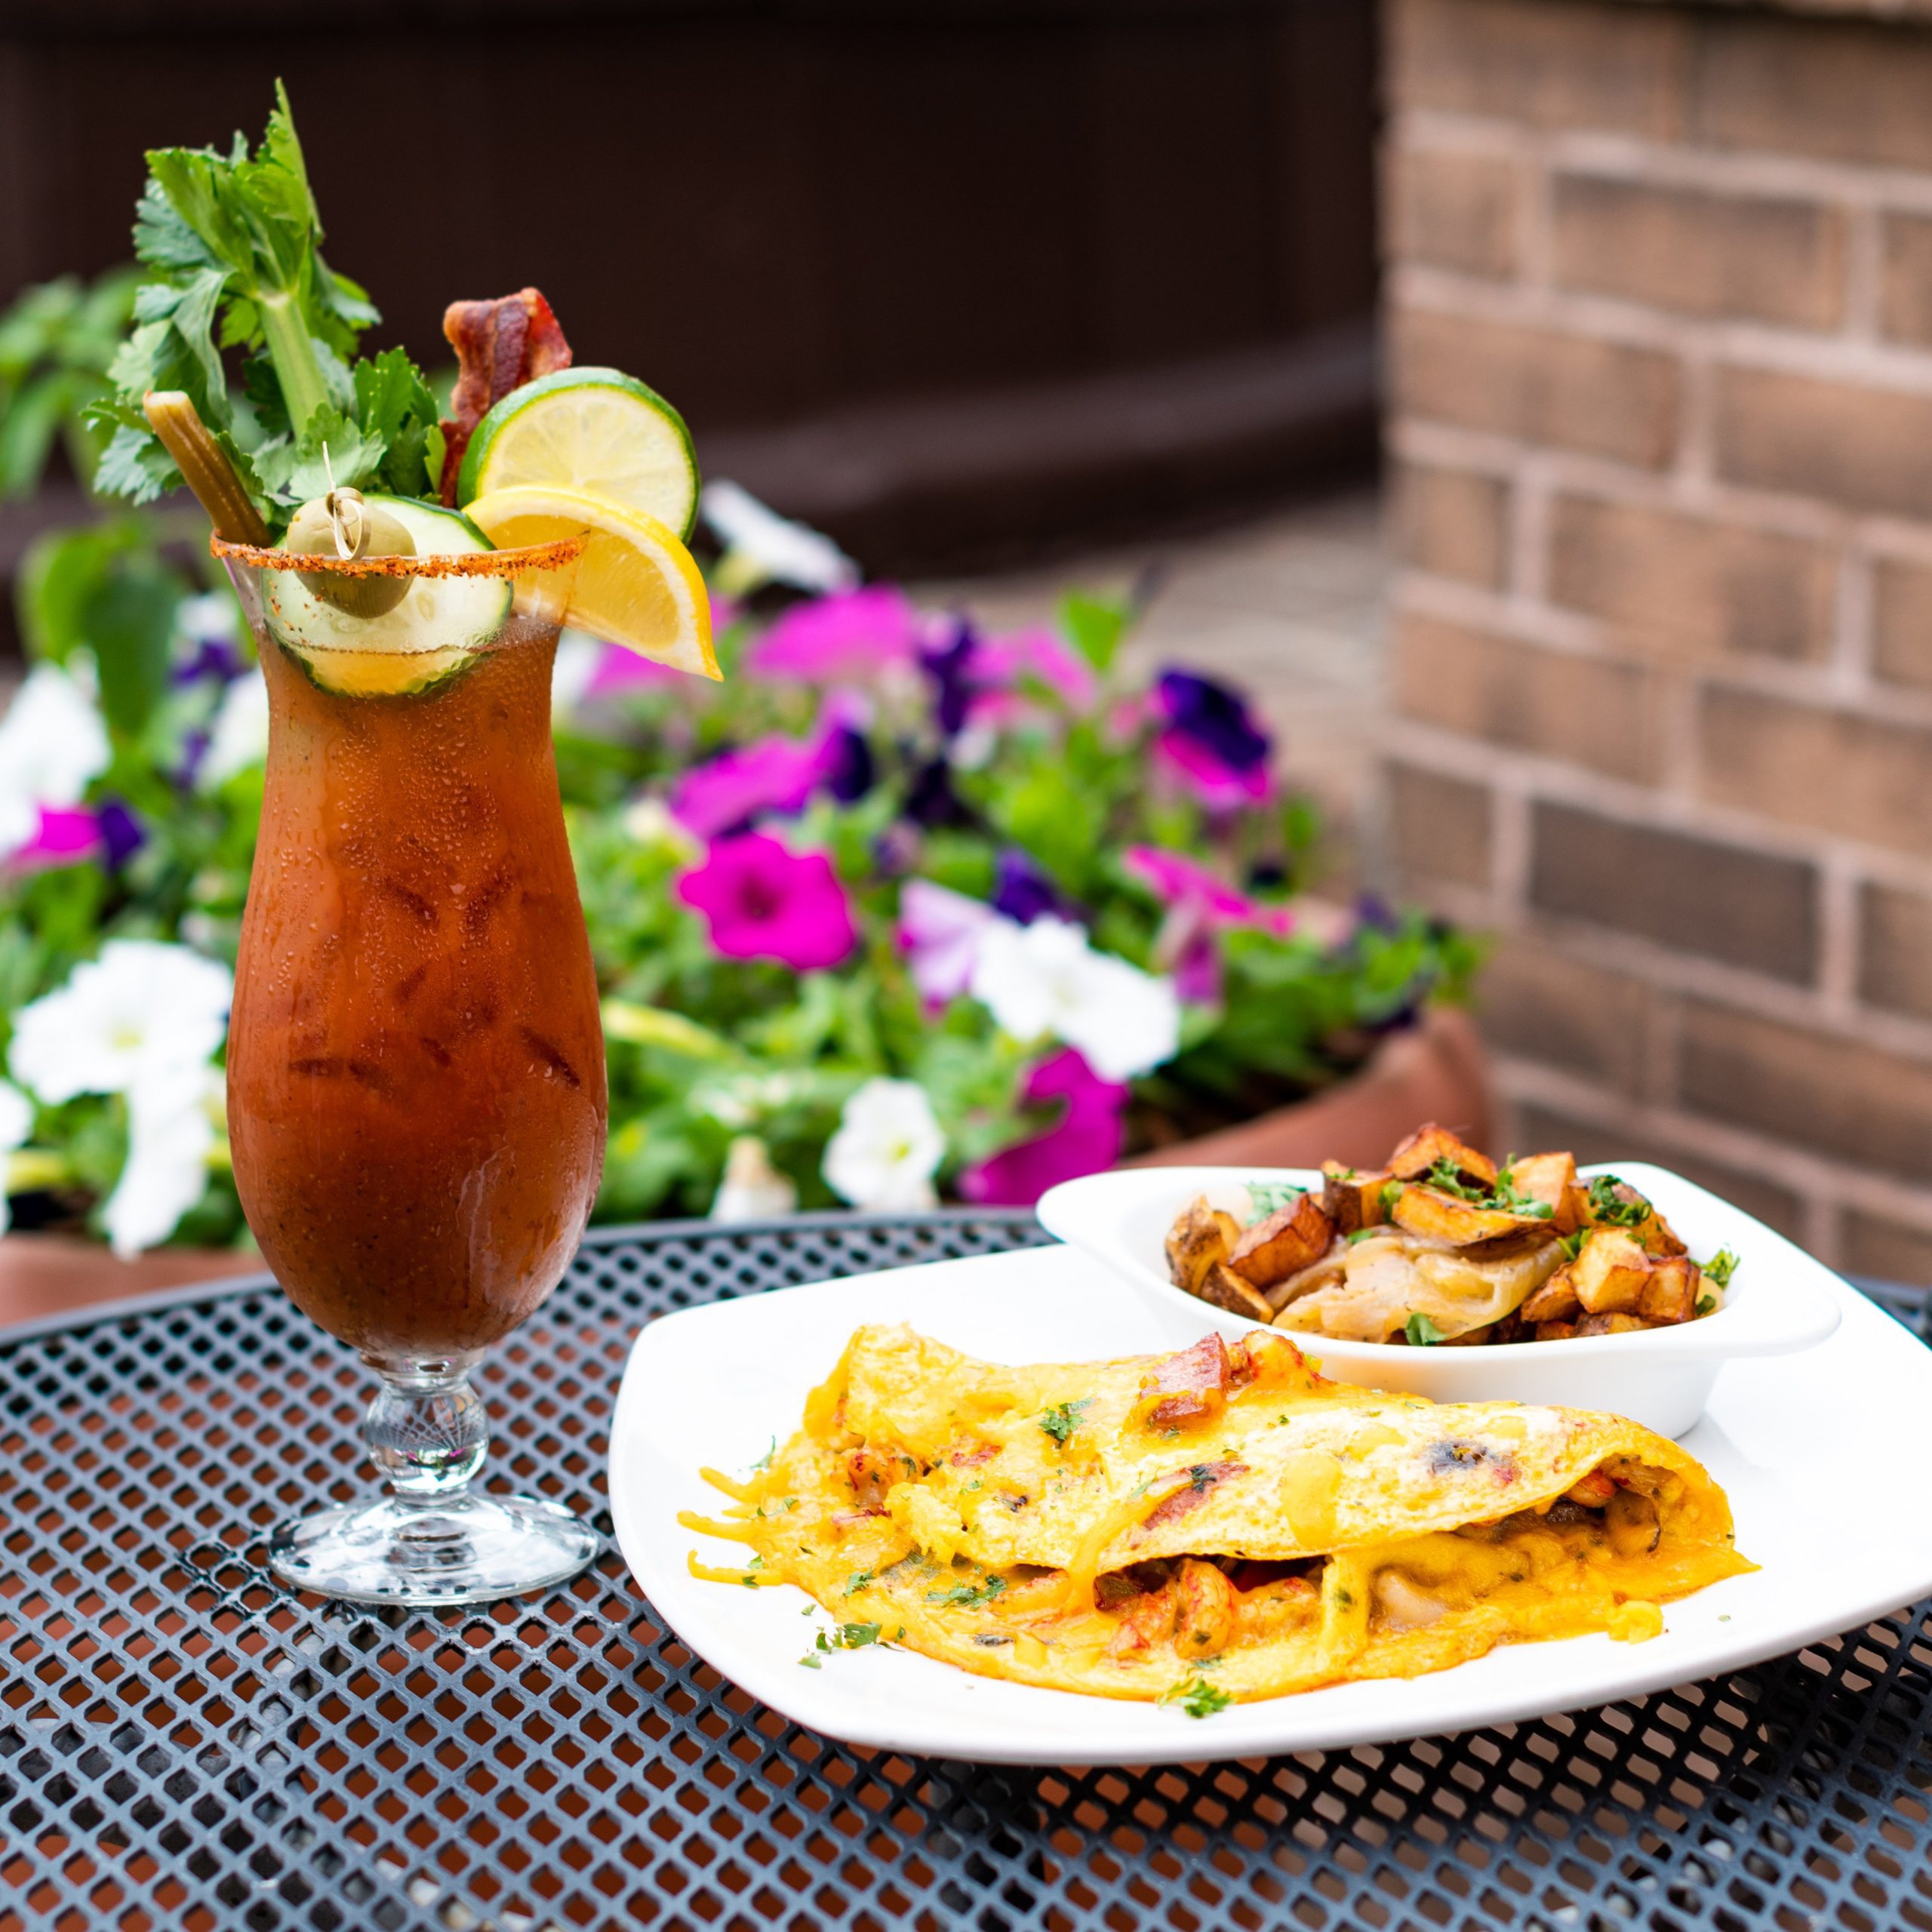 Omelet and Iced Tea on Table